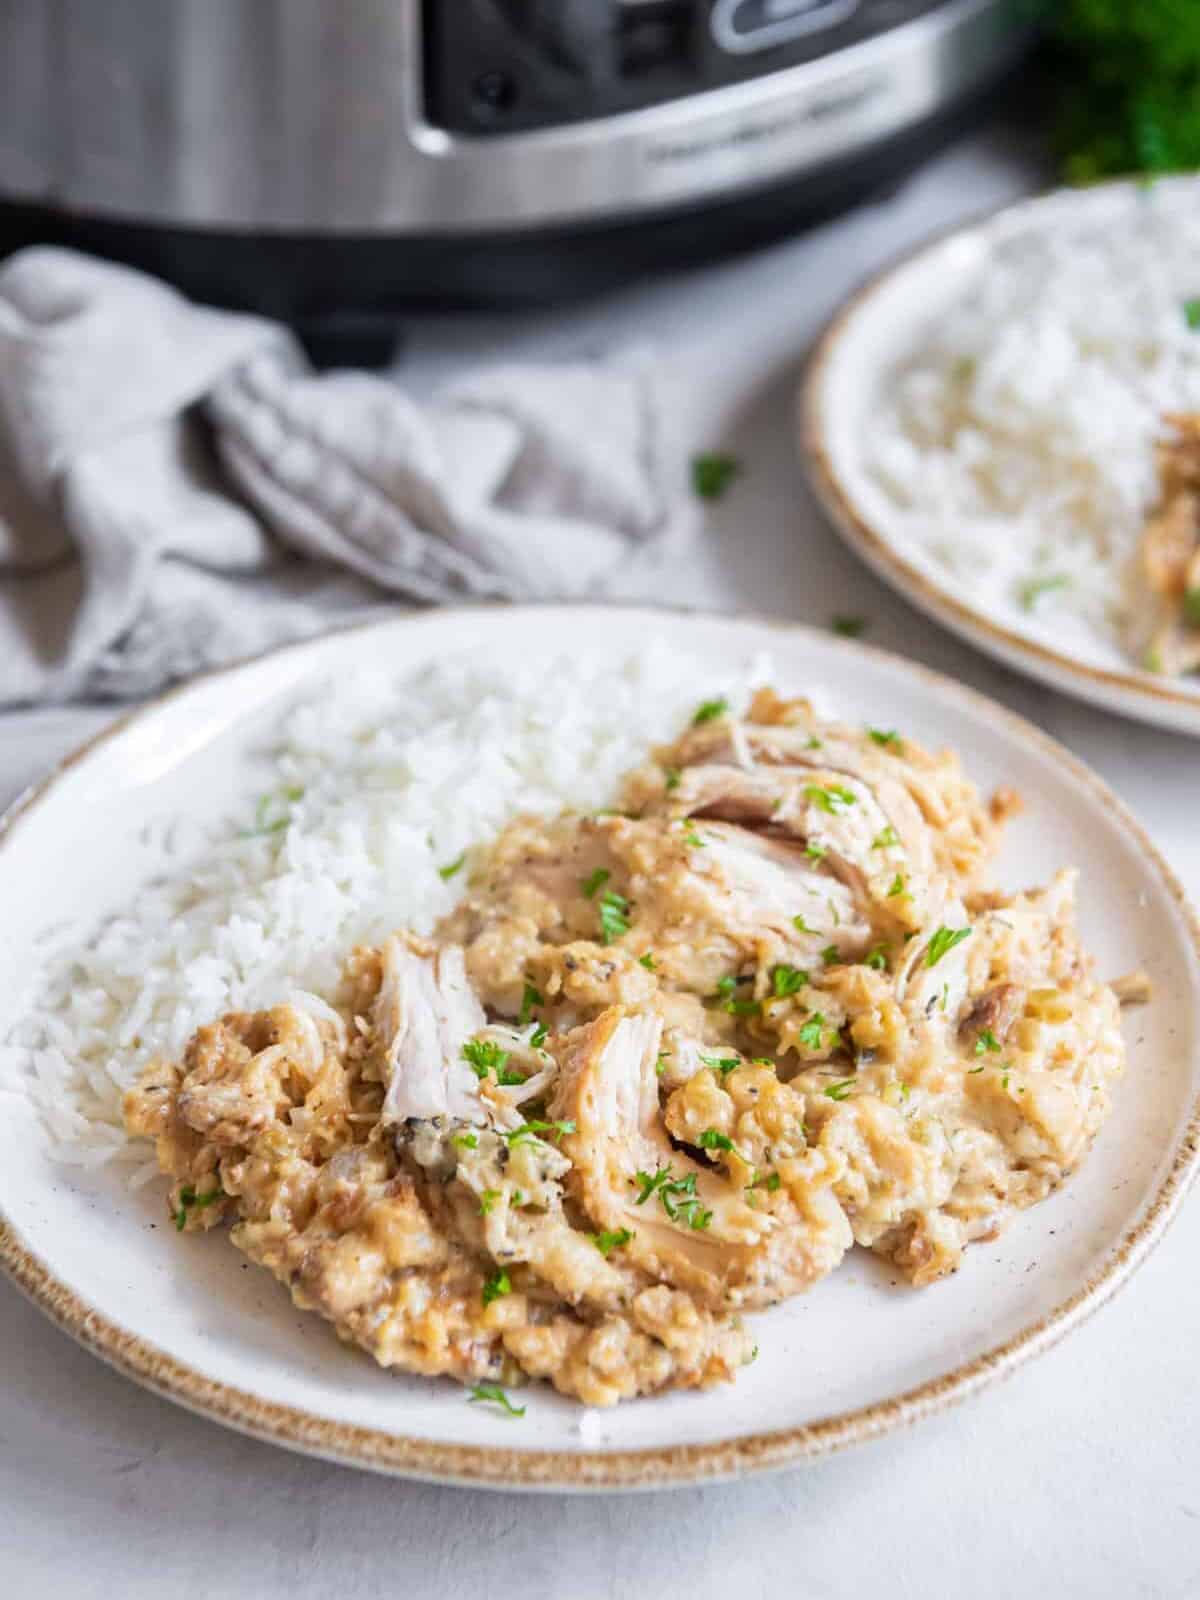 crockpot chicken and stuffing with white rice on a white plate.